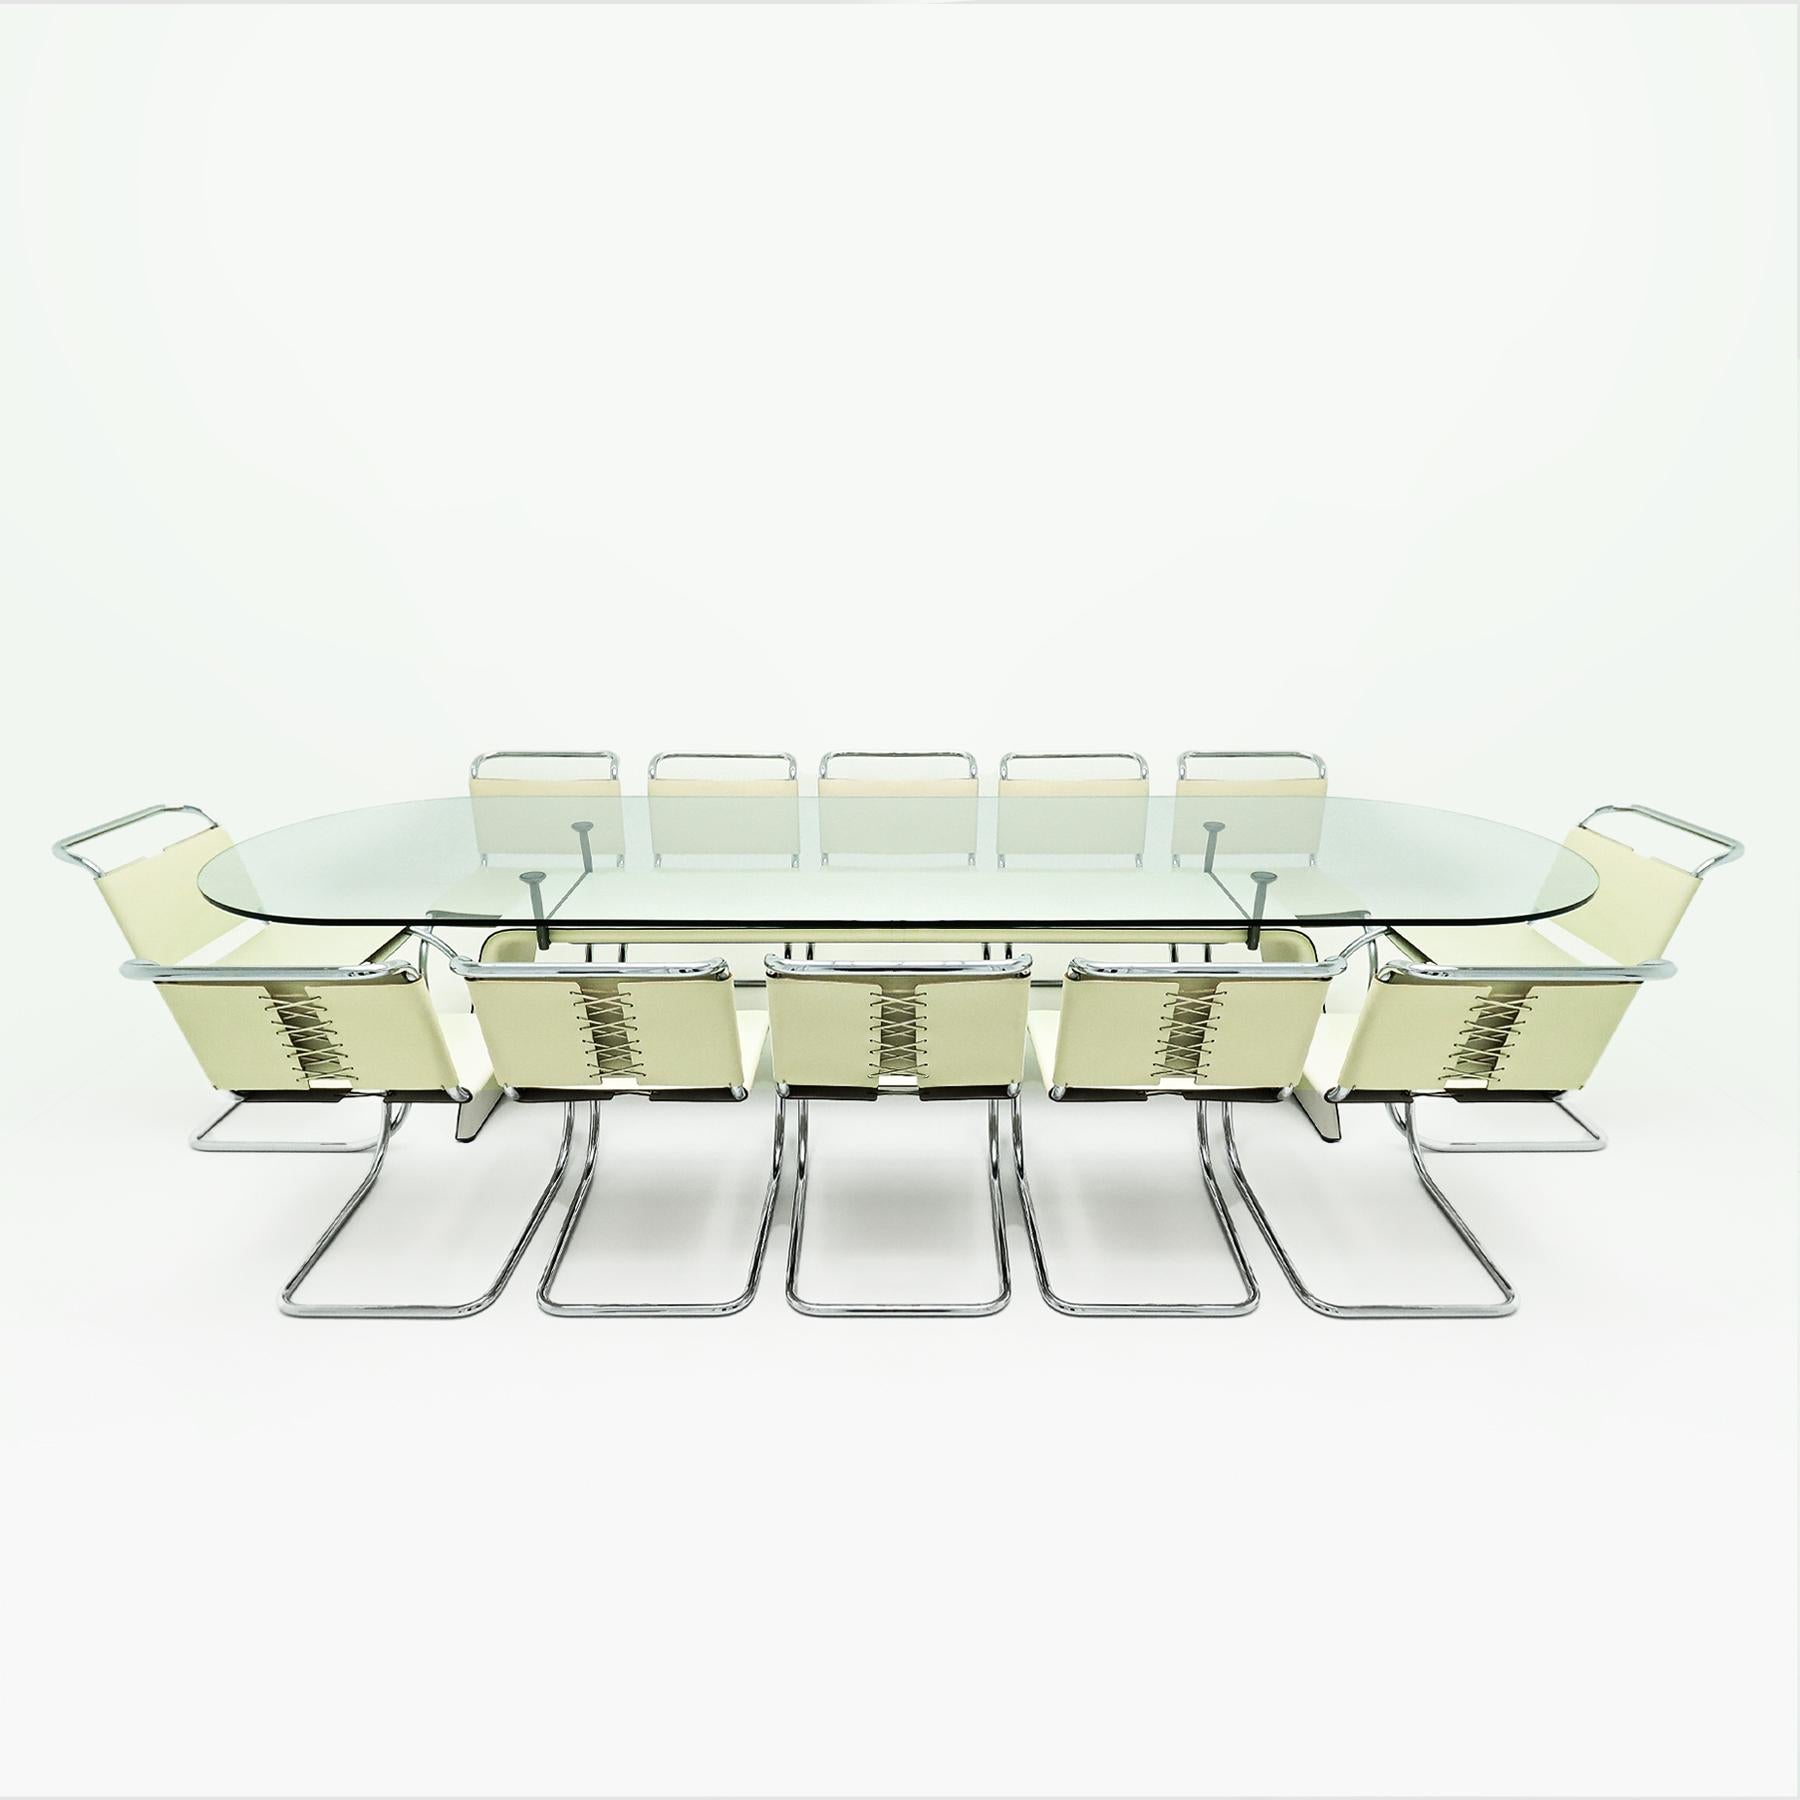 Italian 12 Knoll, Mies van der Rohe MR10 chairs matched to a Matteo Grassi dining table